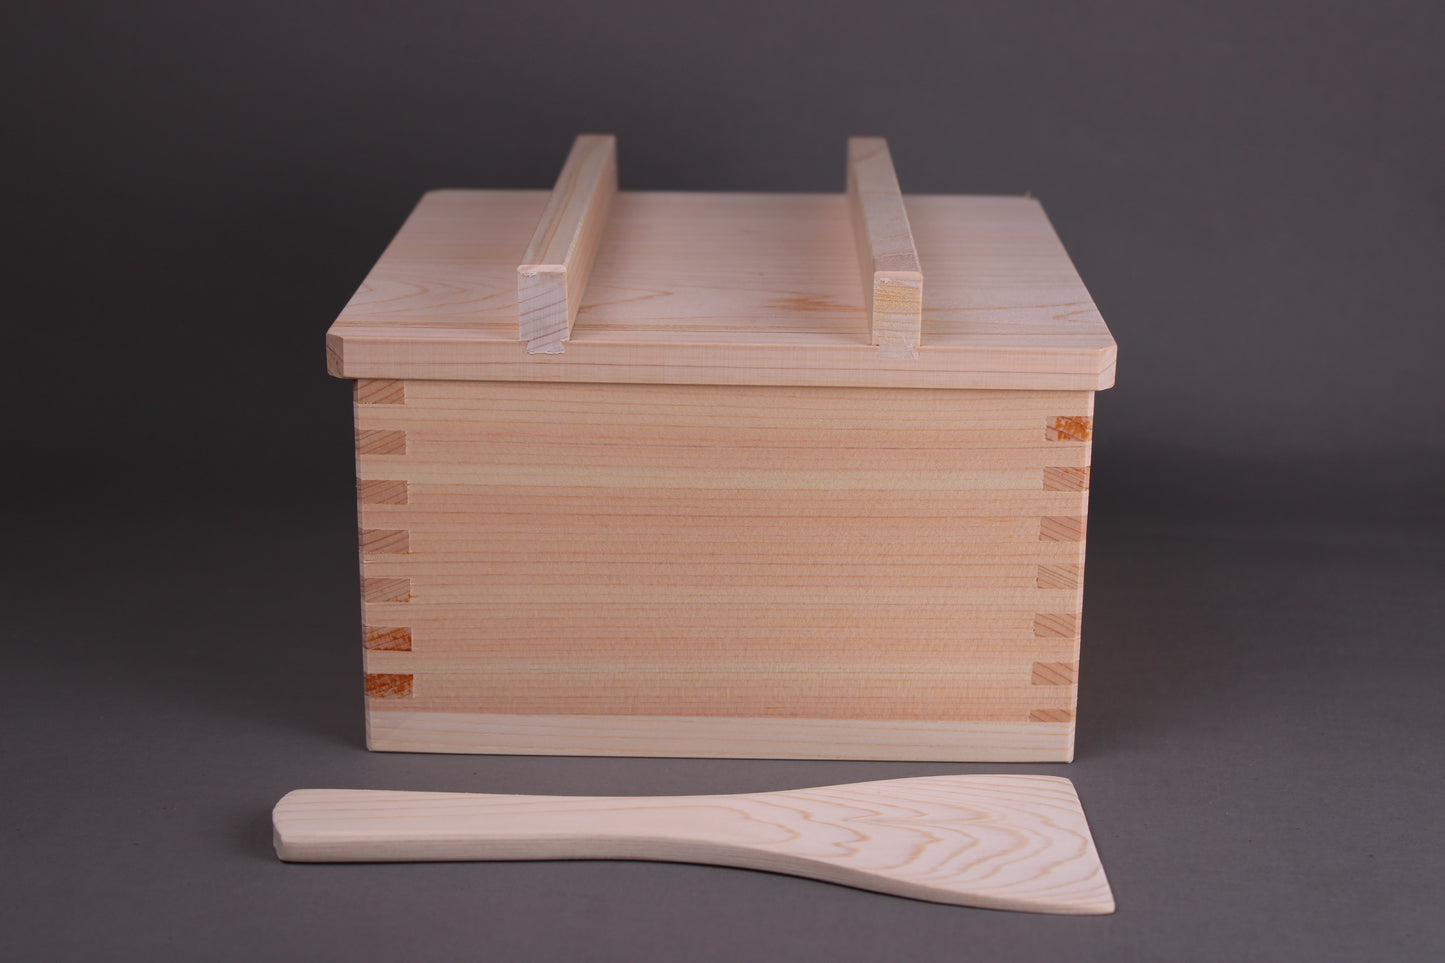 square hinoki rice chest 5 cup capacity with nosebitsu lid atop and wood rice scoop in front by yamacoh